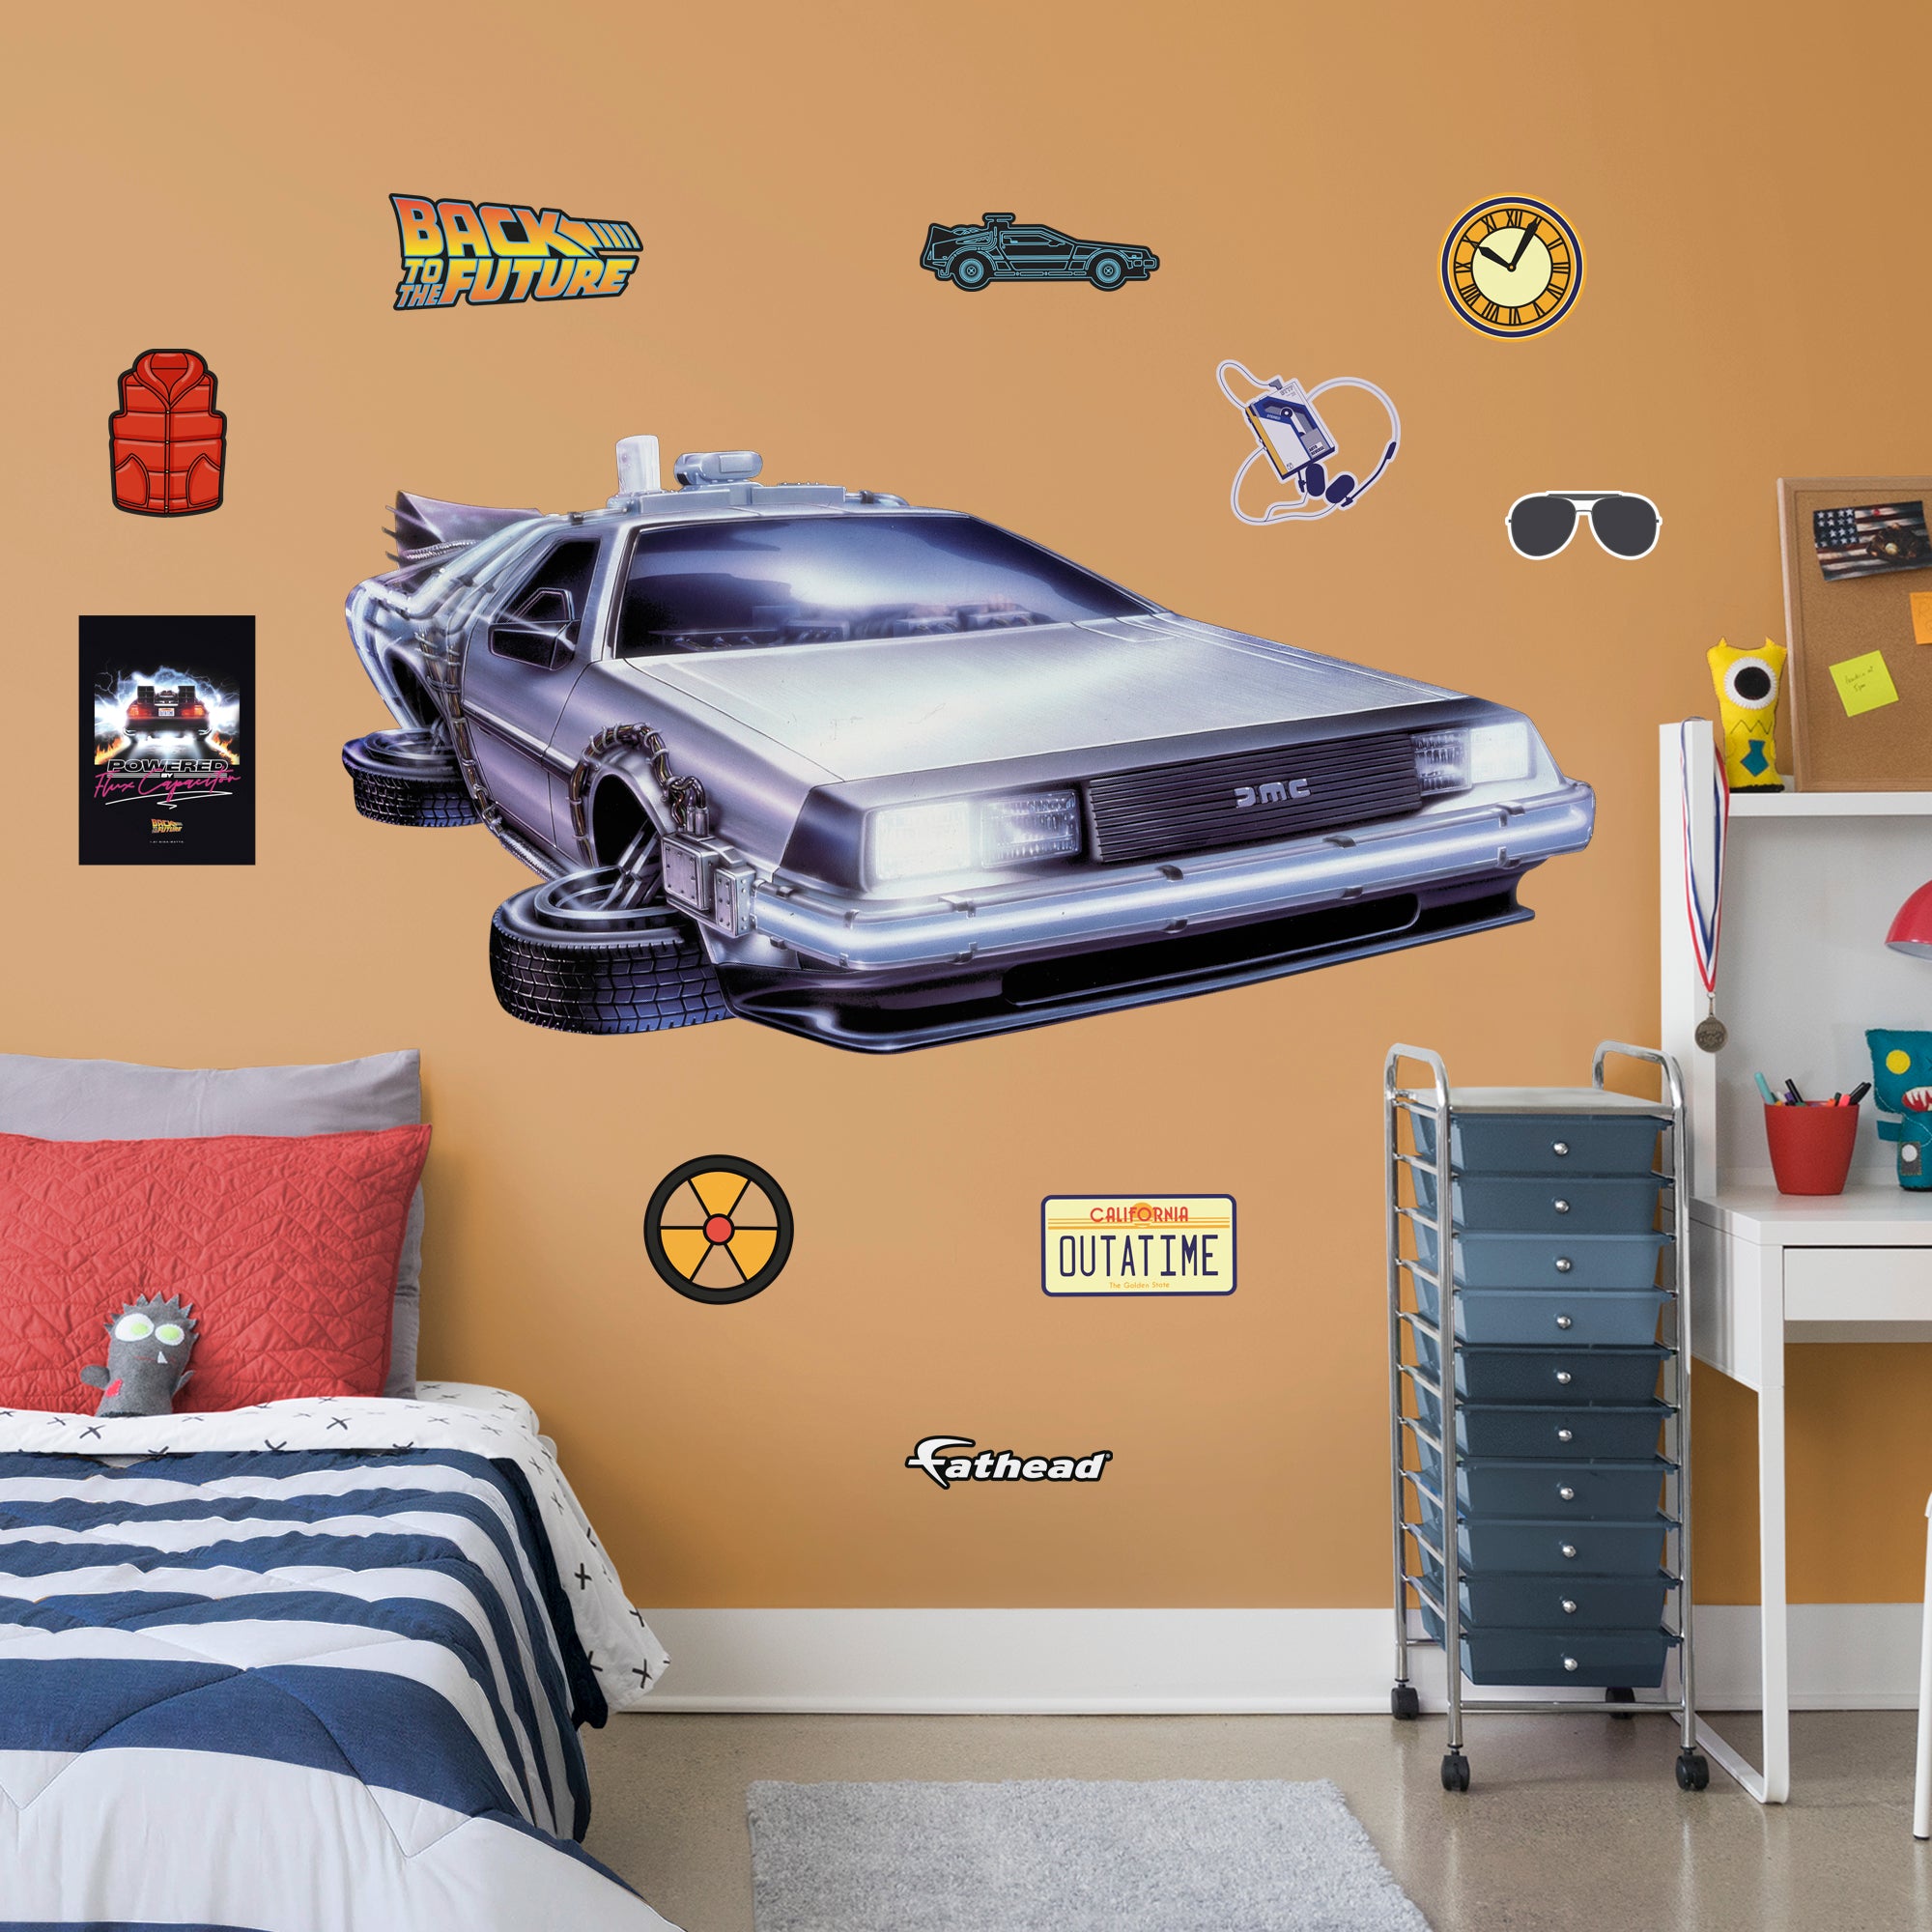 Back to the Future DeLorean Time Machine II Officially Licensed NBC Universal Removable Wall Decal Life-Size + 10 Decals by Fath